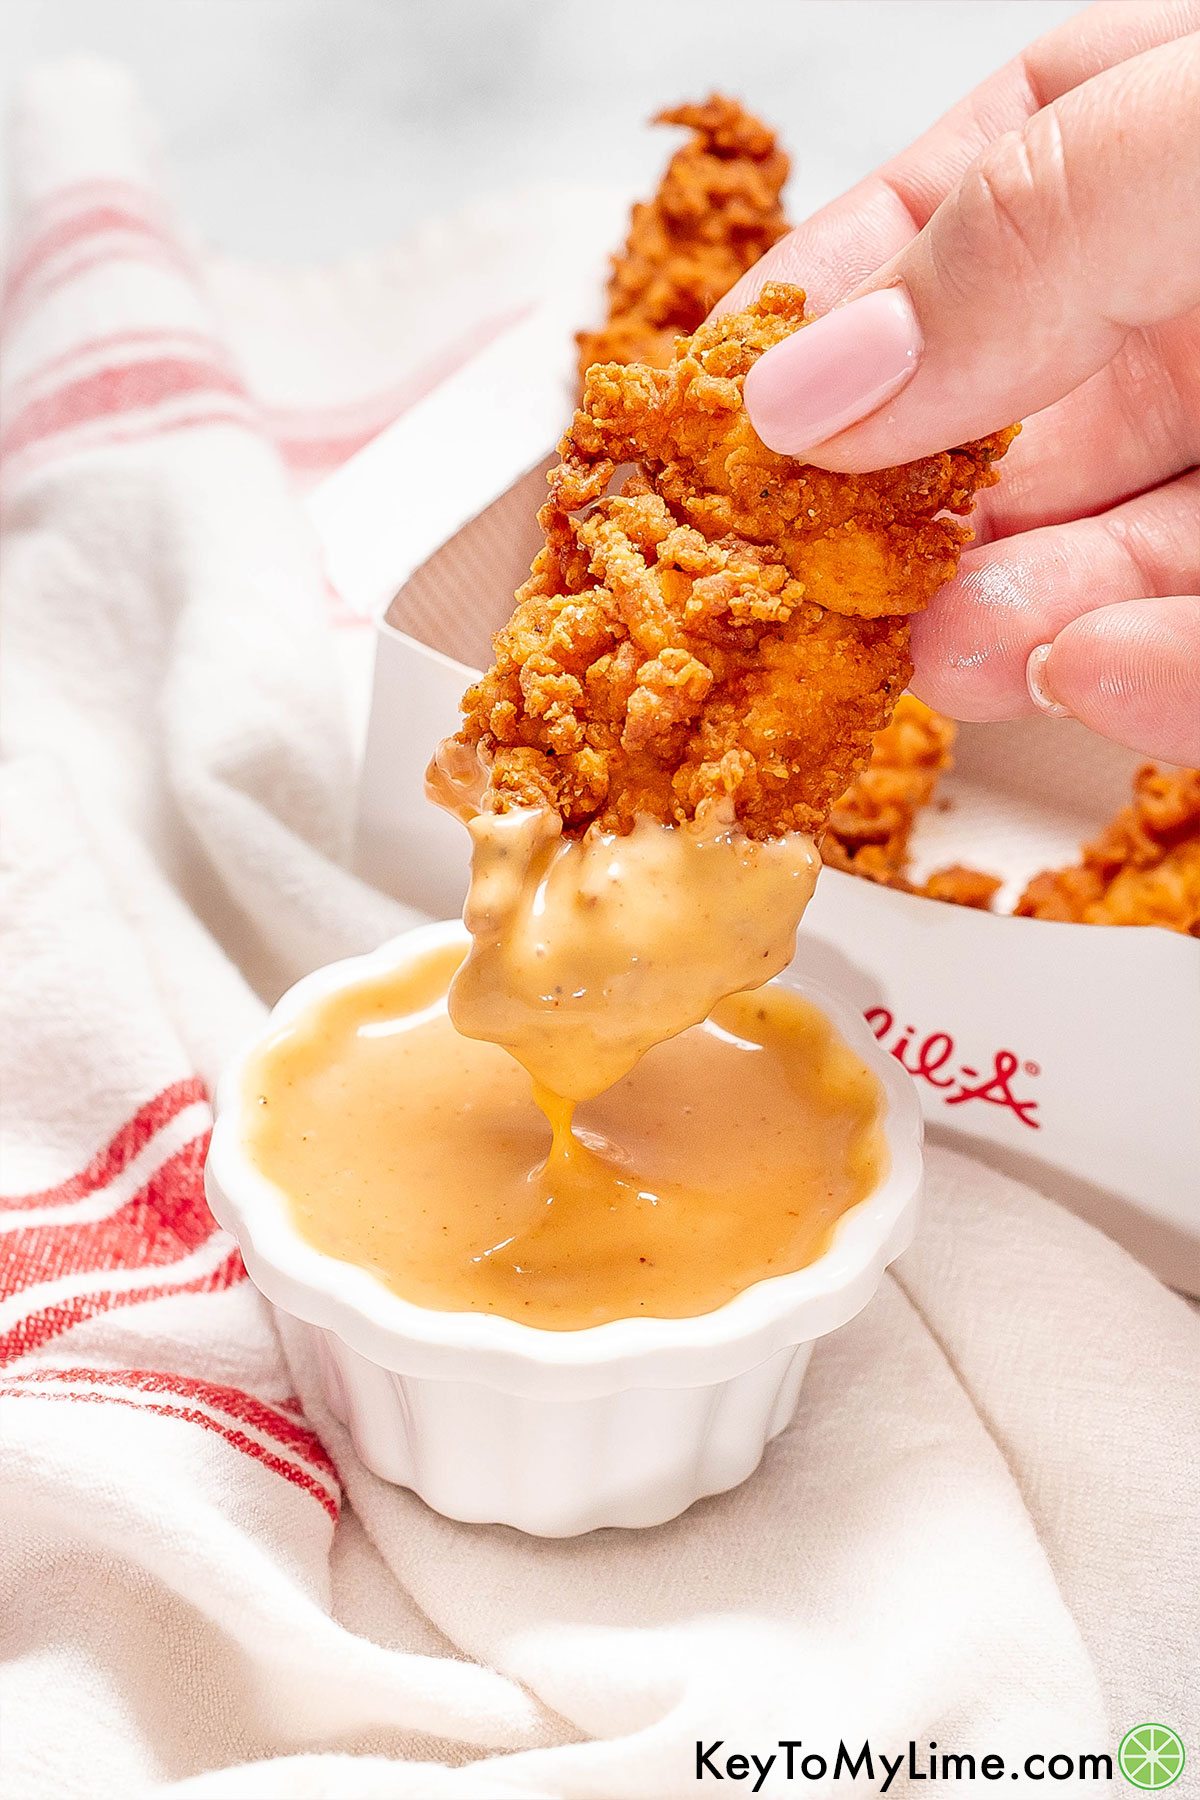 A crispy chicken tender with homemade Chick Fil A sauce on the lower half.